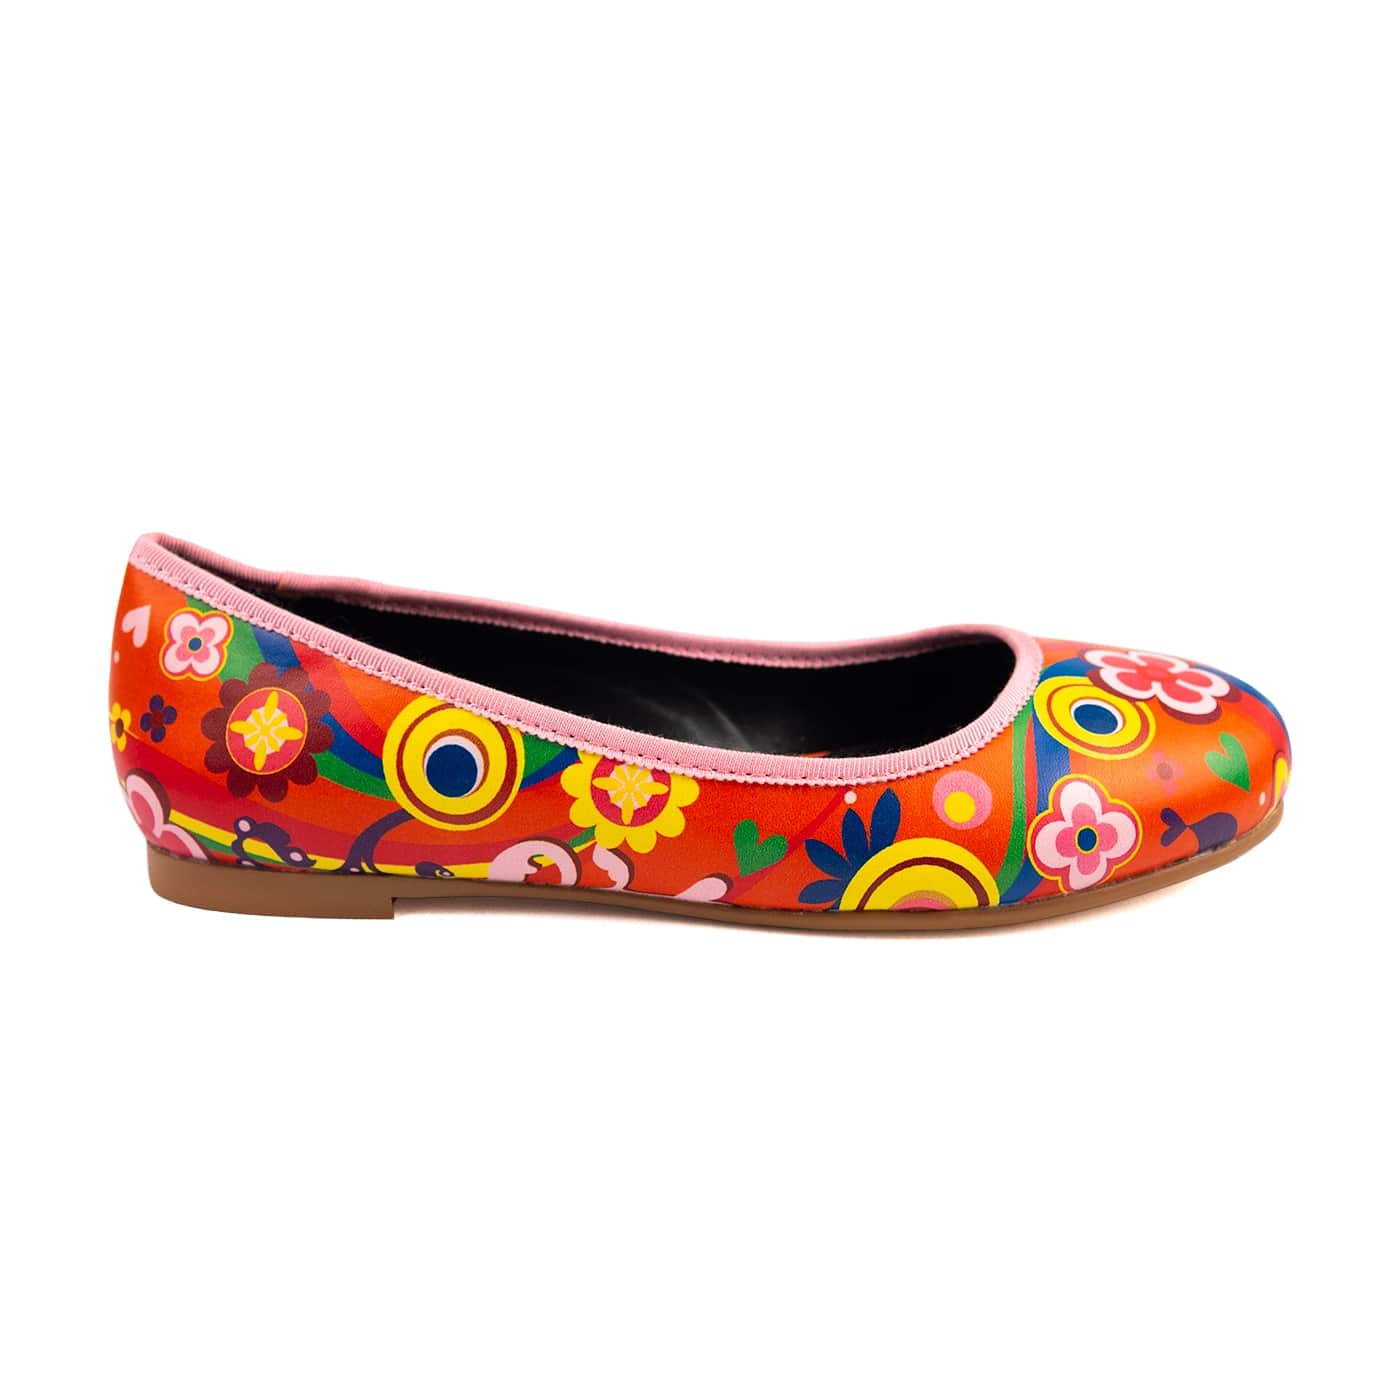 Groovy Remix Ballet Flats by RainbowsAndFairies.com (Woodstock - Flower Power - Psychedelic Hippy - Mismatched Shoes - Quirky Shoes - Slip Ones - Comfy Flats - Cute Shoes) - SKU: FW_BALET_GROOV_REM - Pic 04